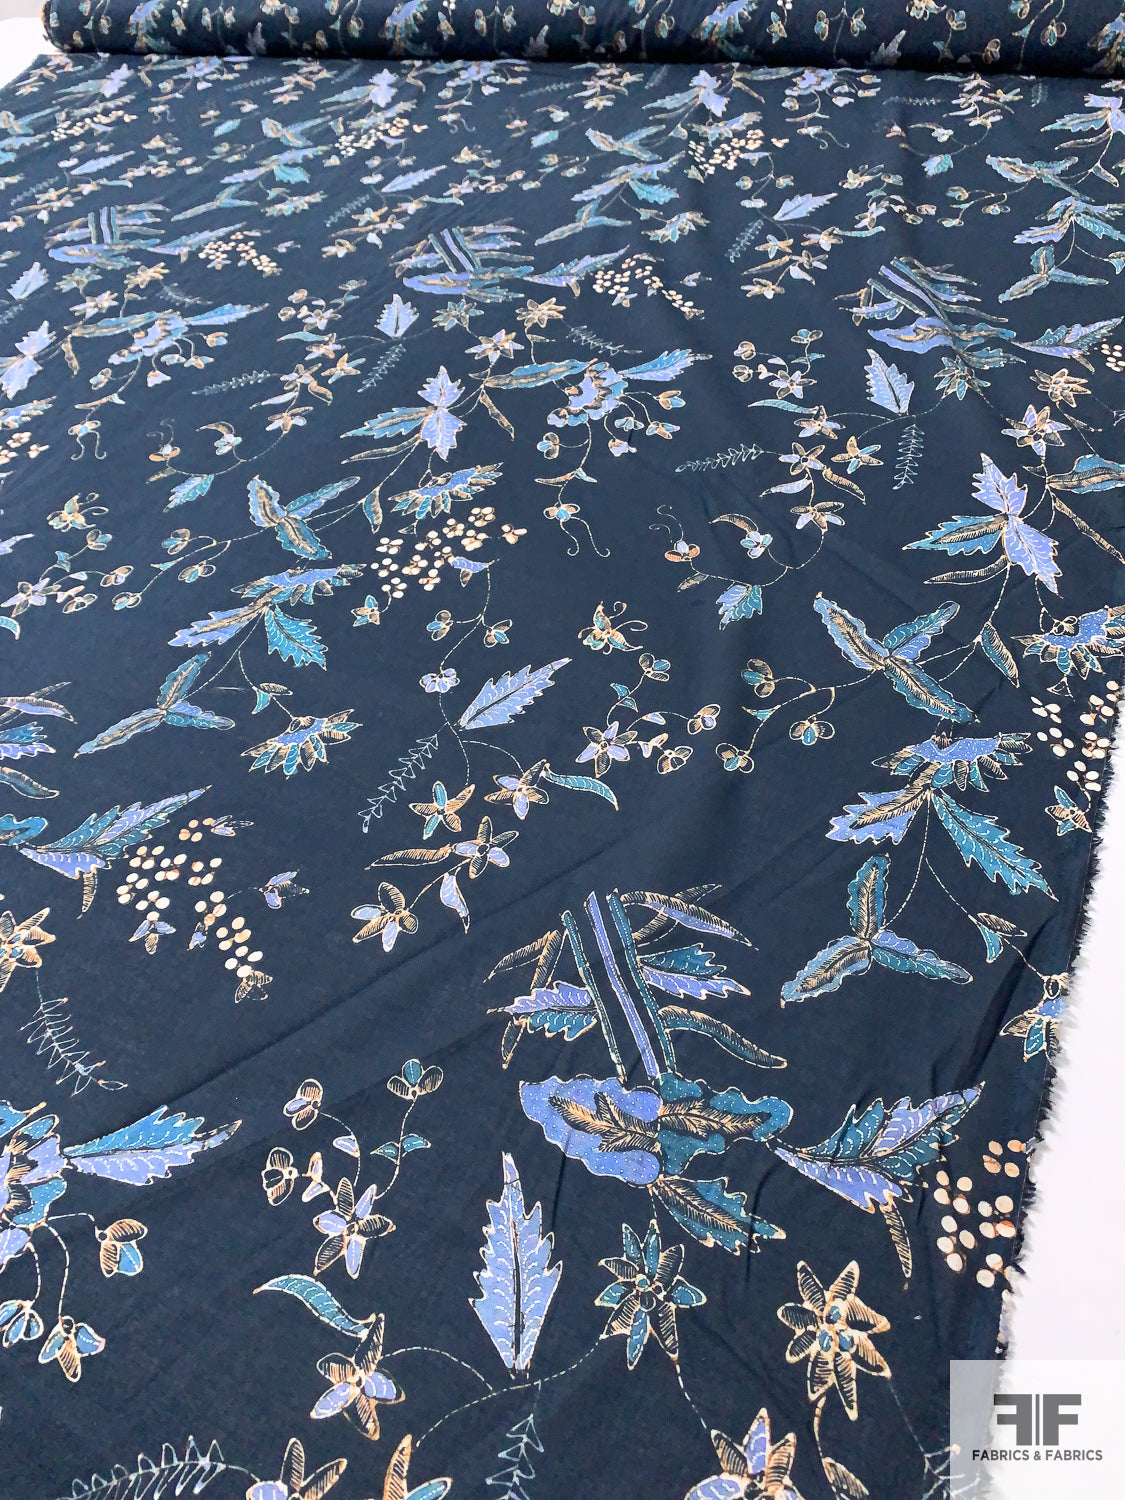 Brown/Teal Floral Embroidered Cotton Drapery Fabric, Fabric By the Yard